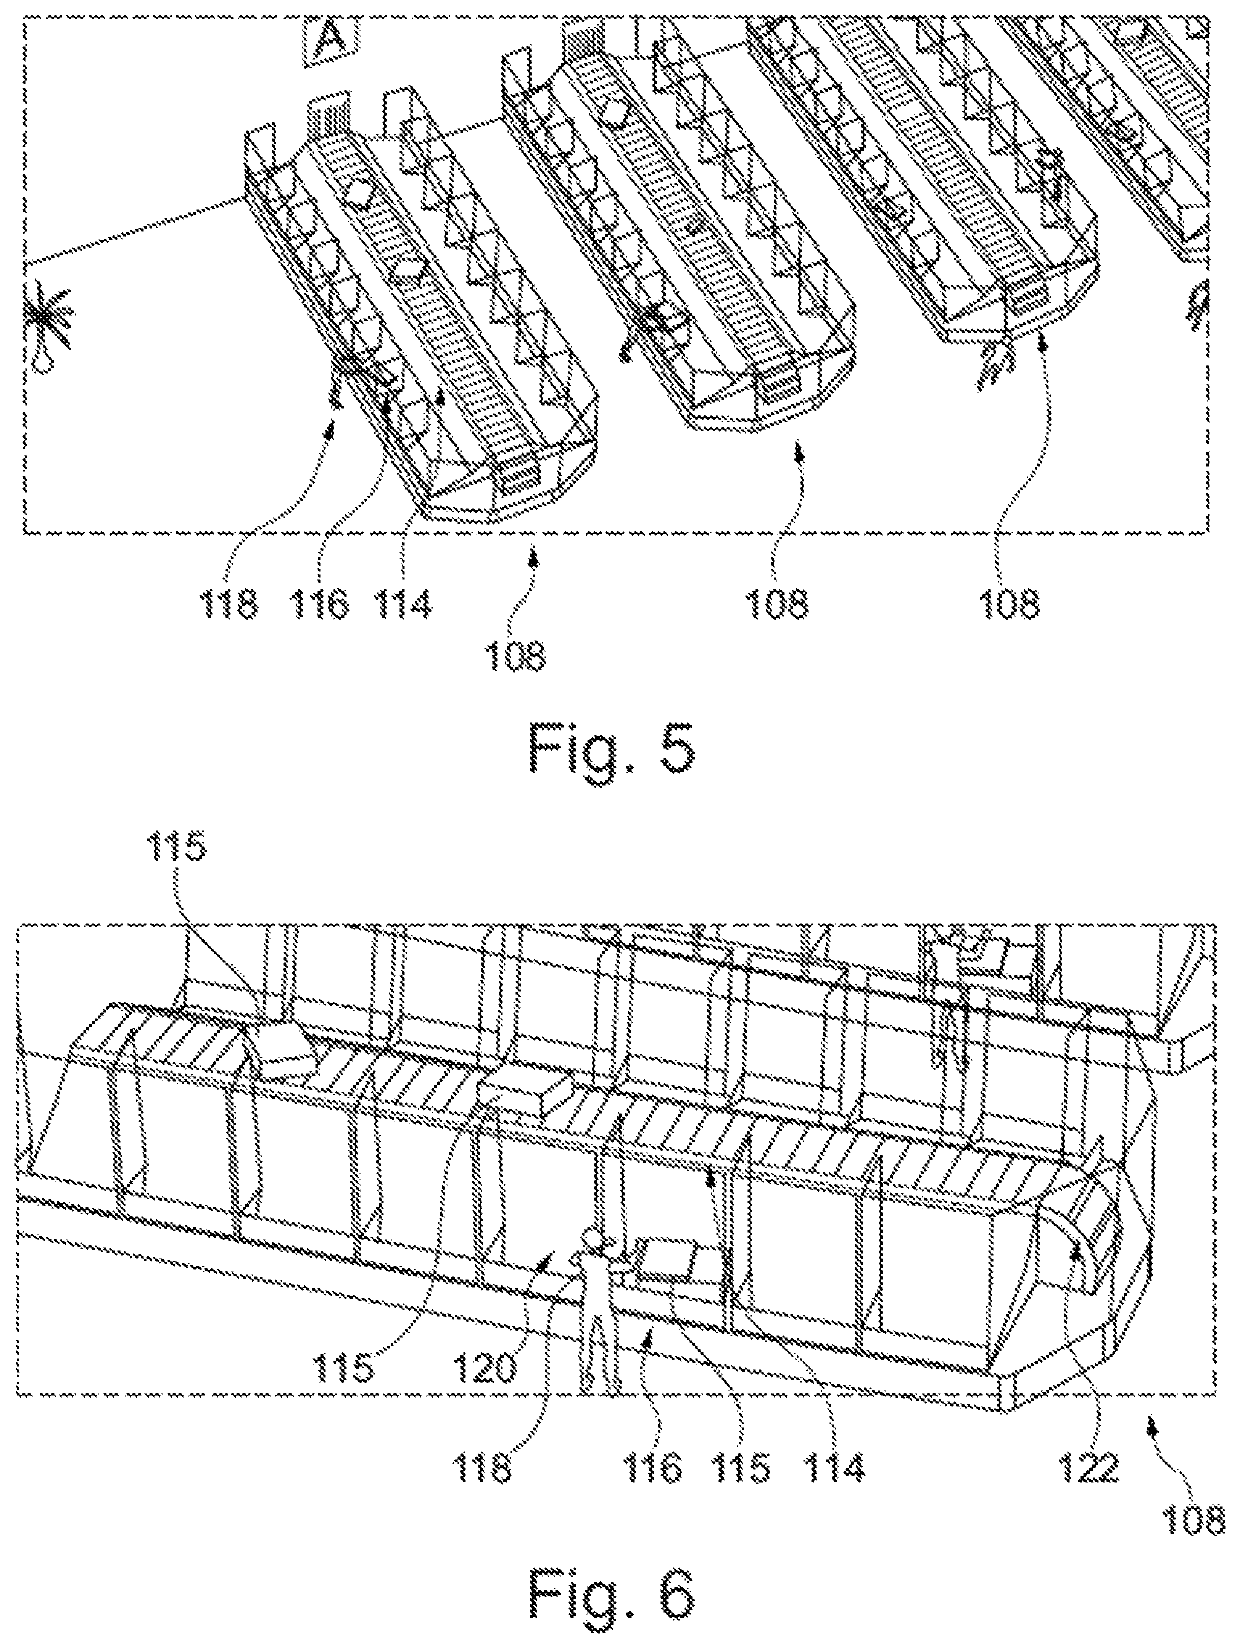 Method of claiming aircraft baggage